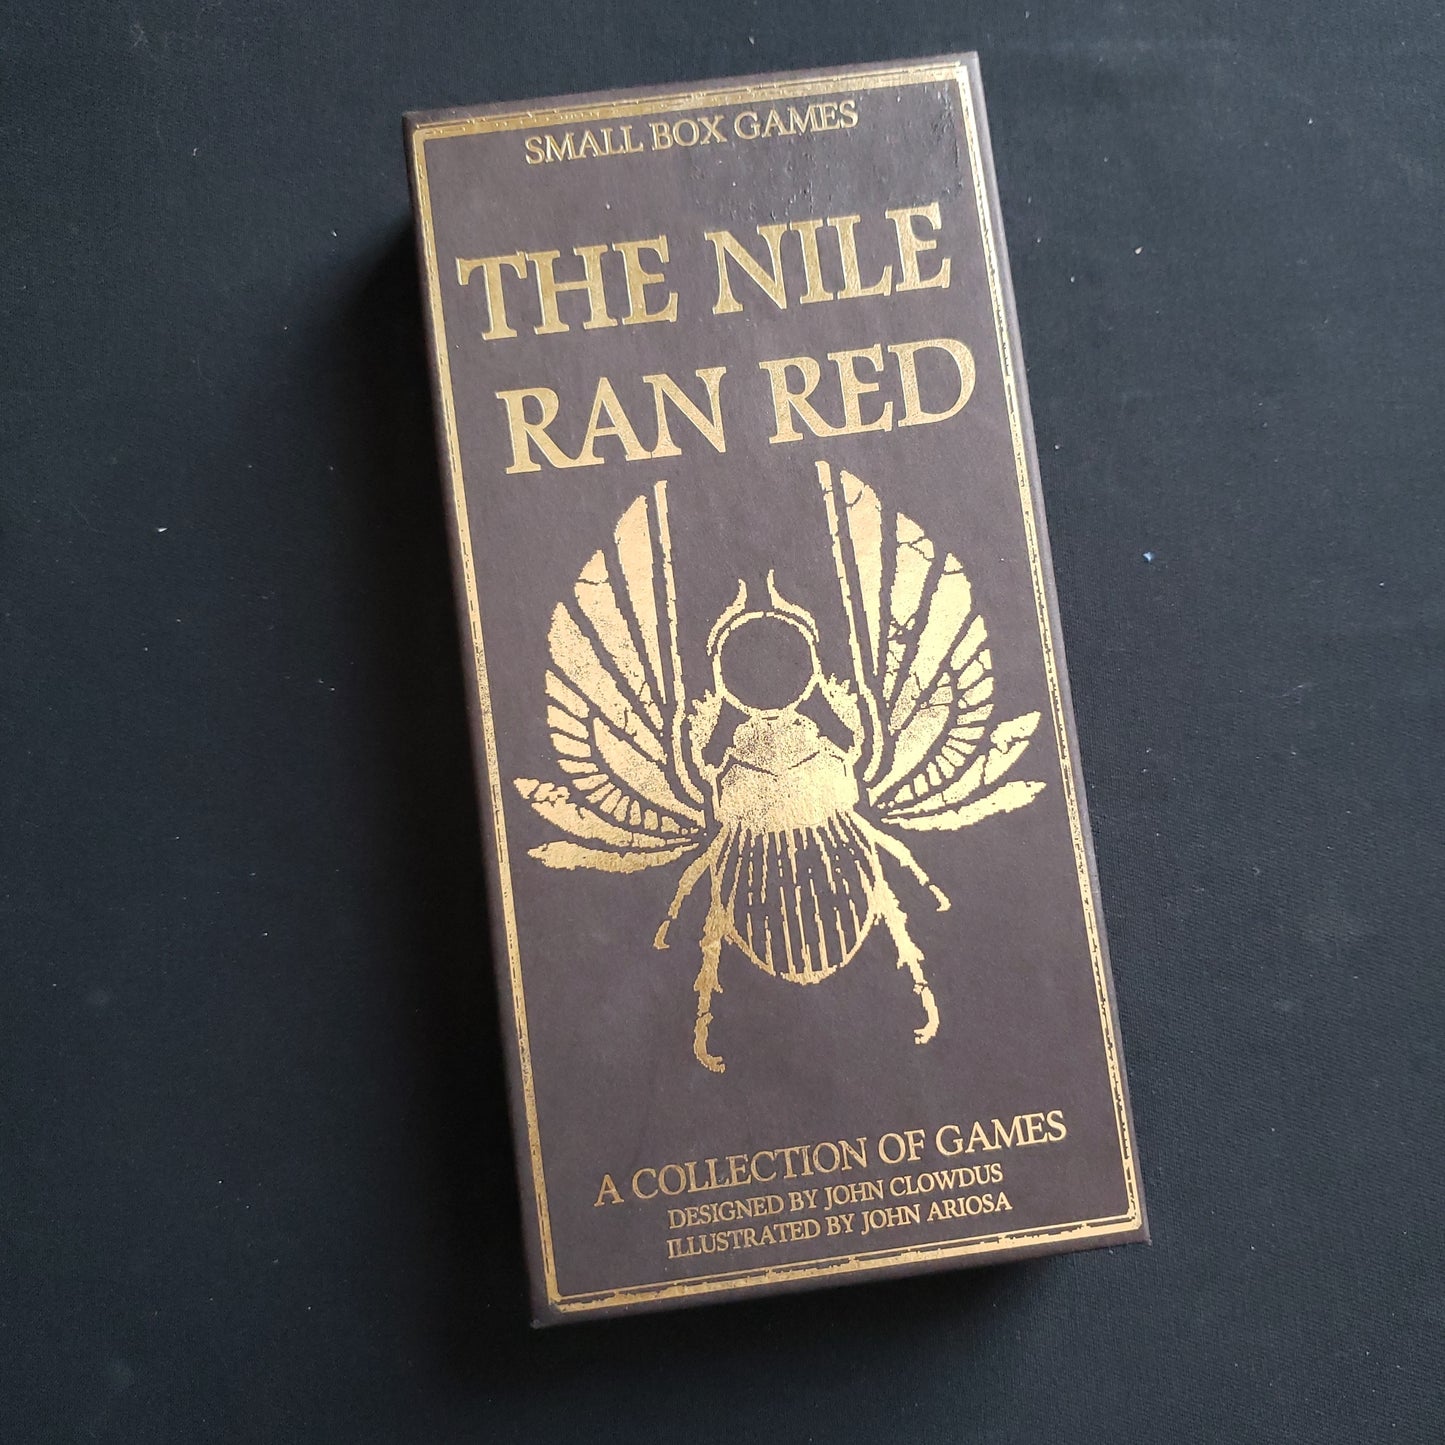 Image shows the front cover of the box of the Nile Ran Red set of card games